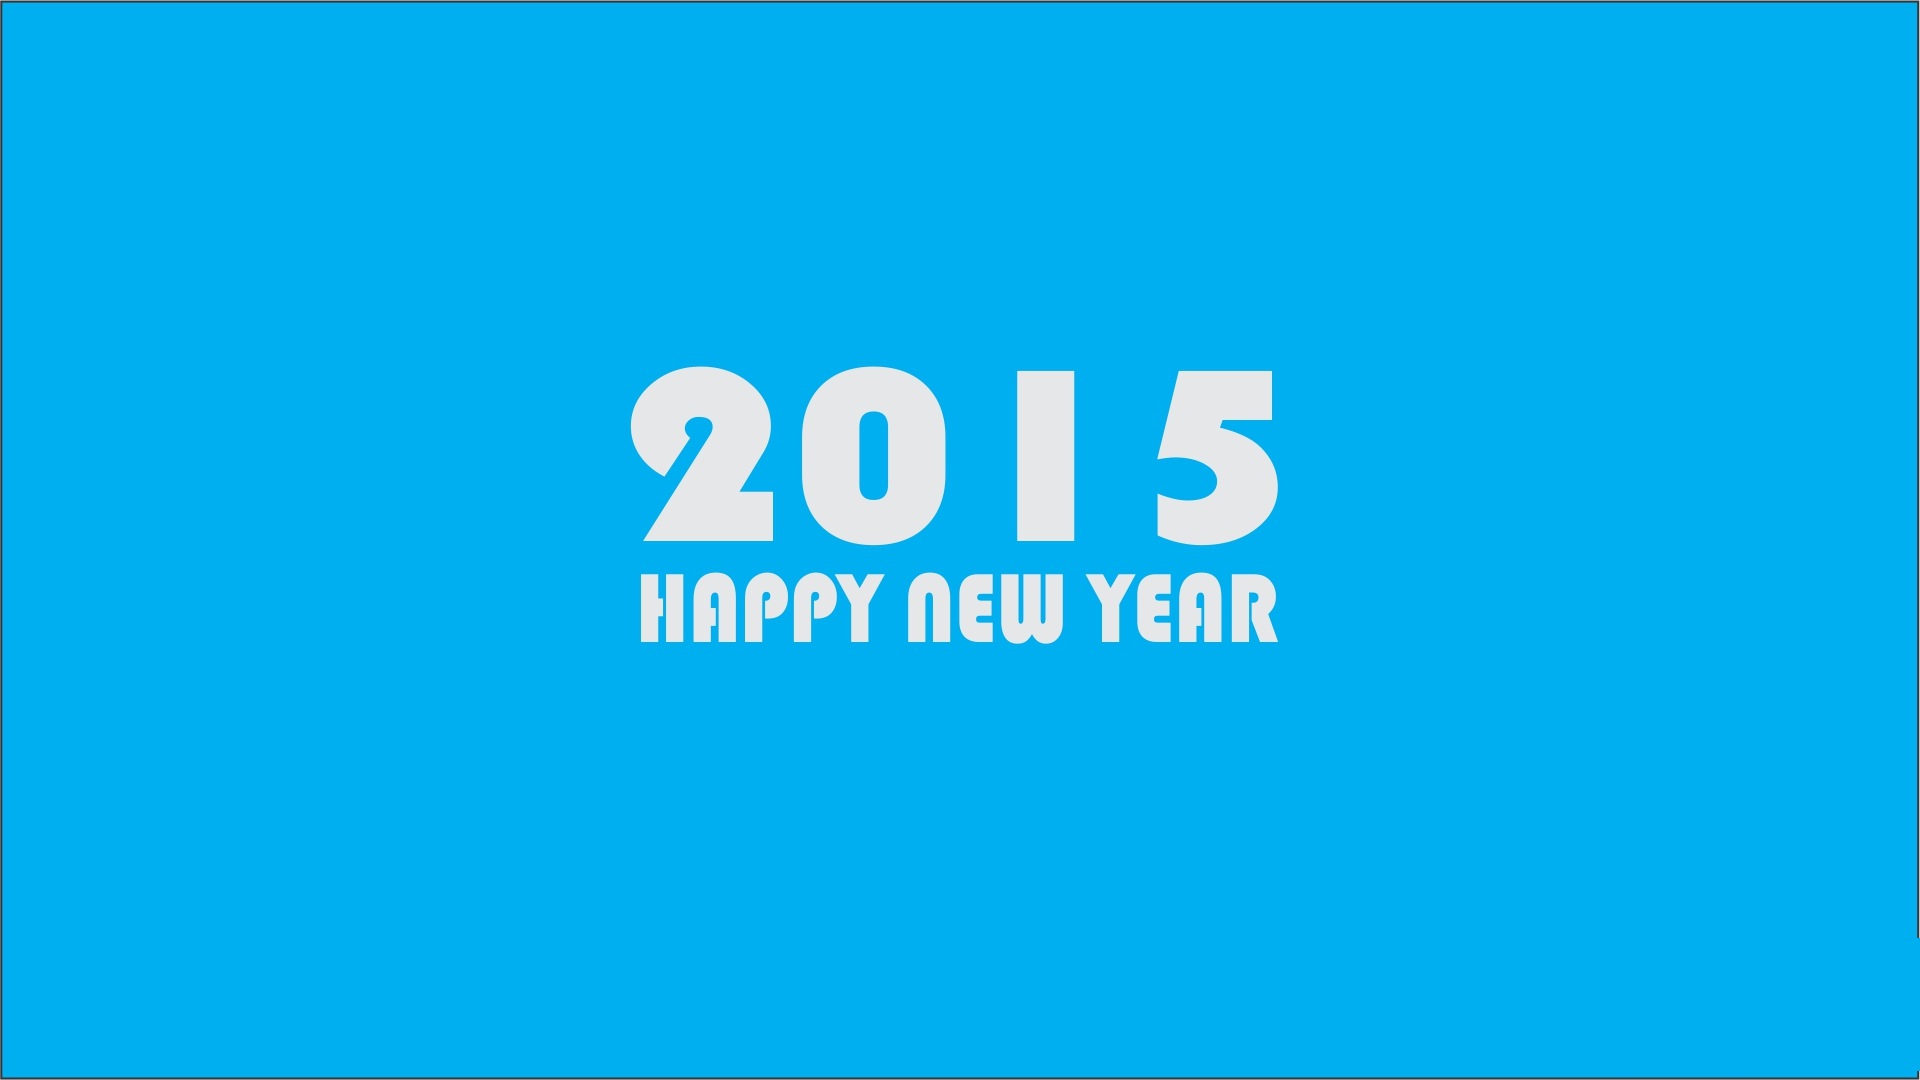 25 Astounding New Year Wallpapers 2015 takedesigns